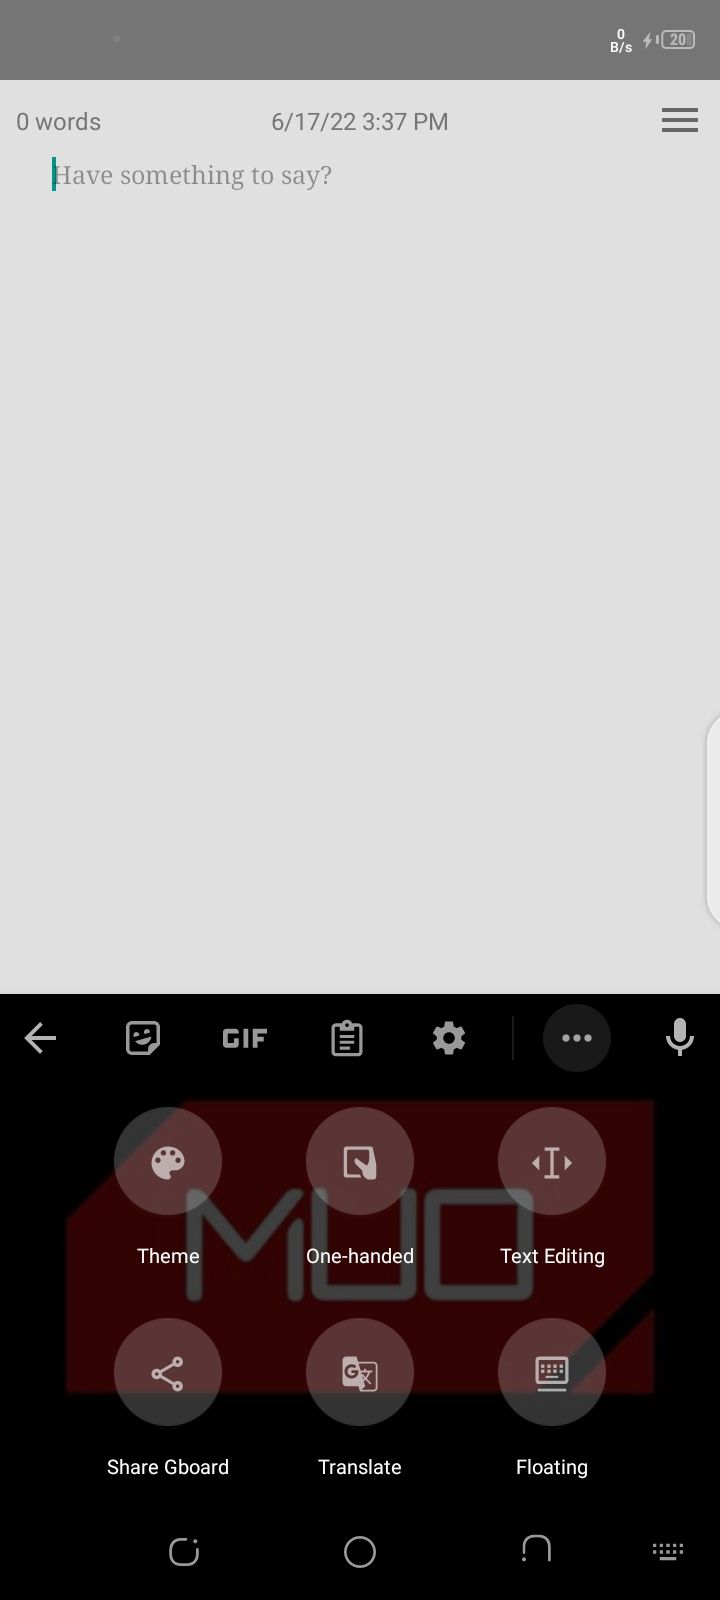 How to translate within the Gboard app